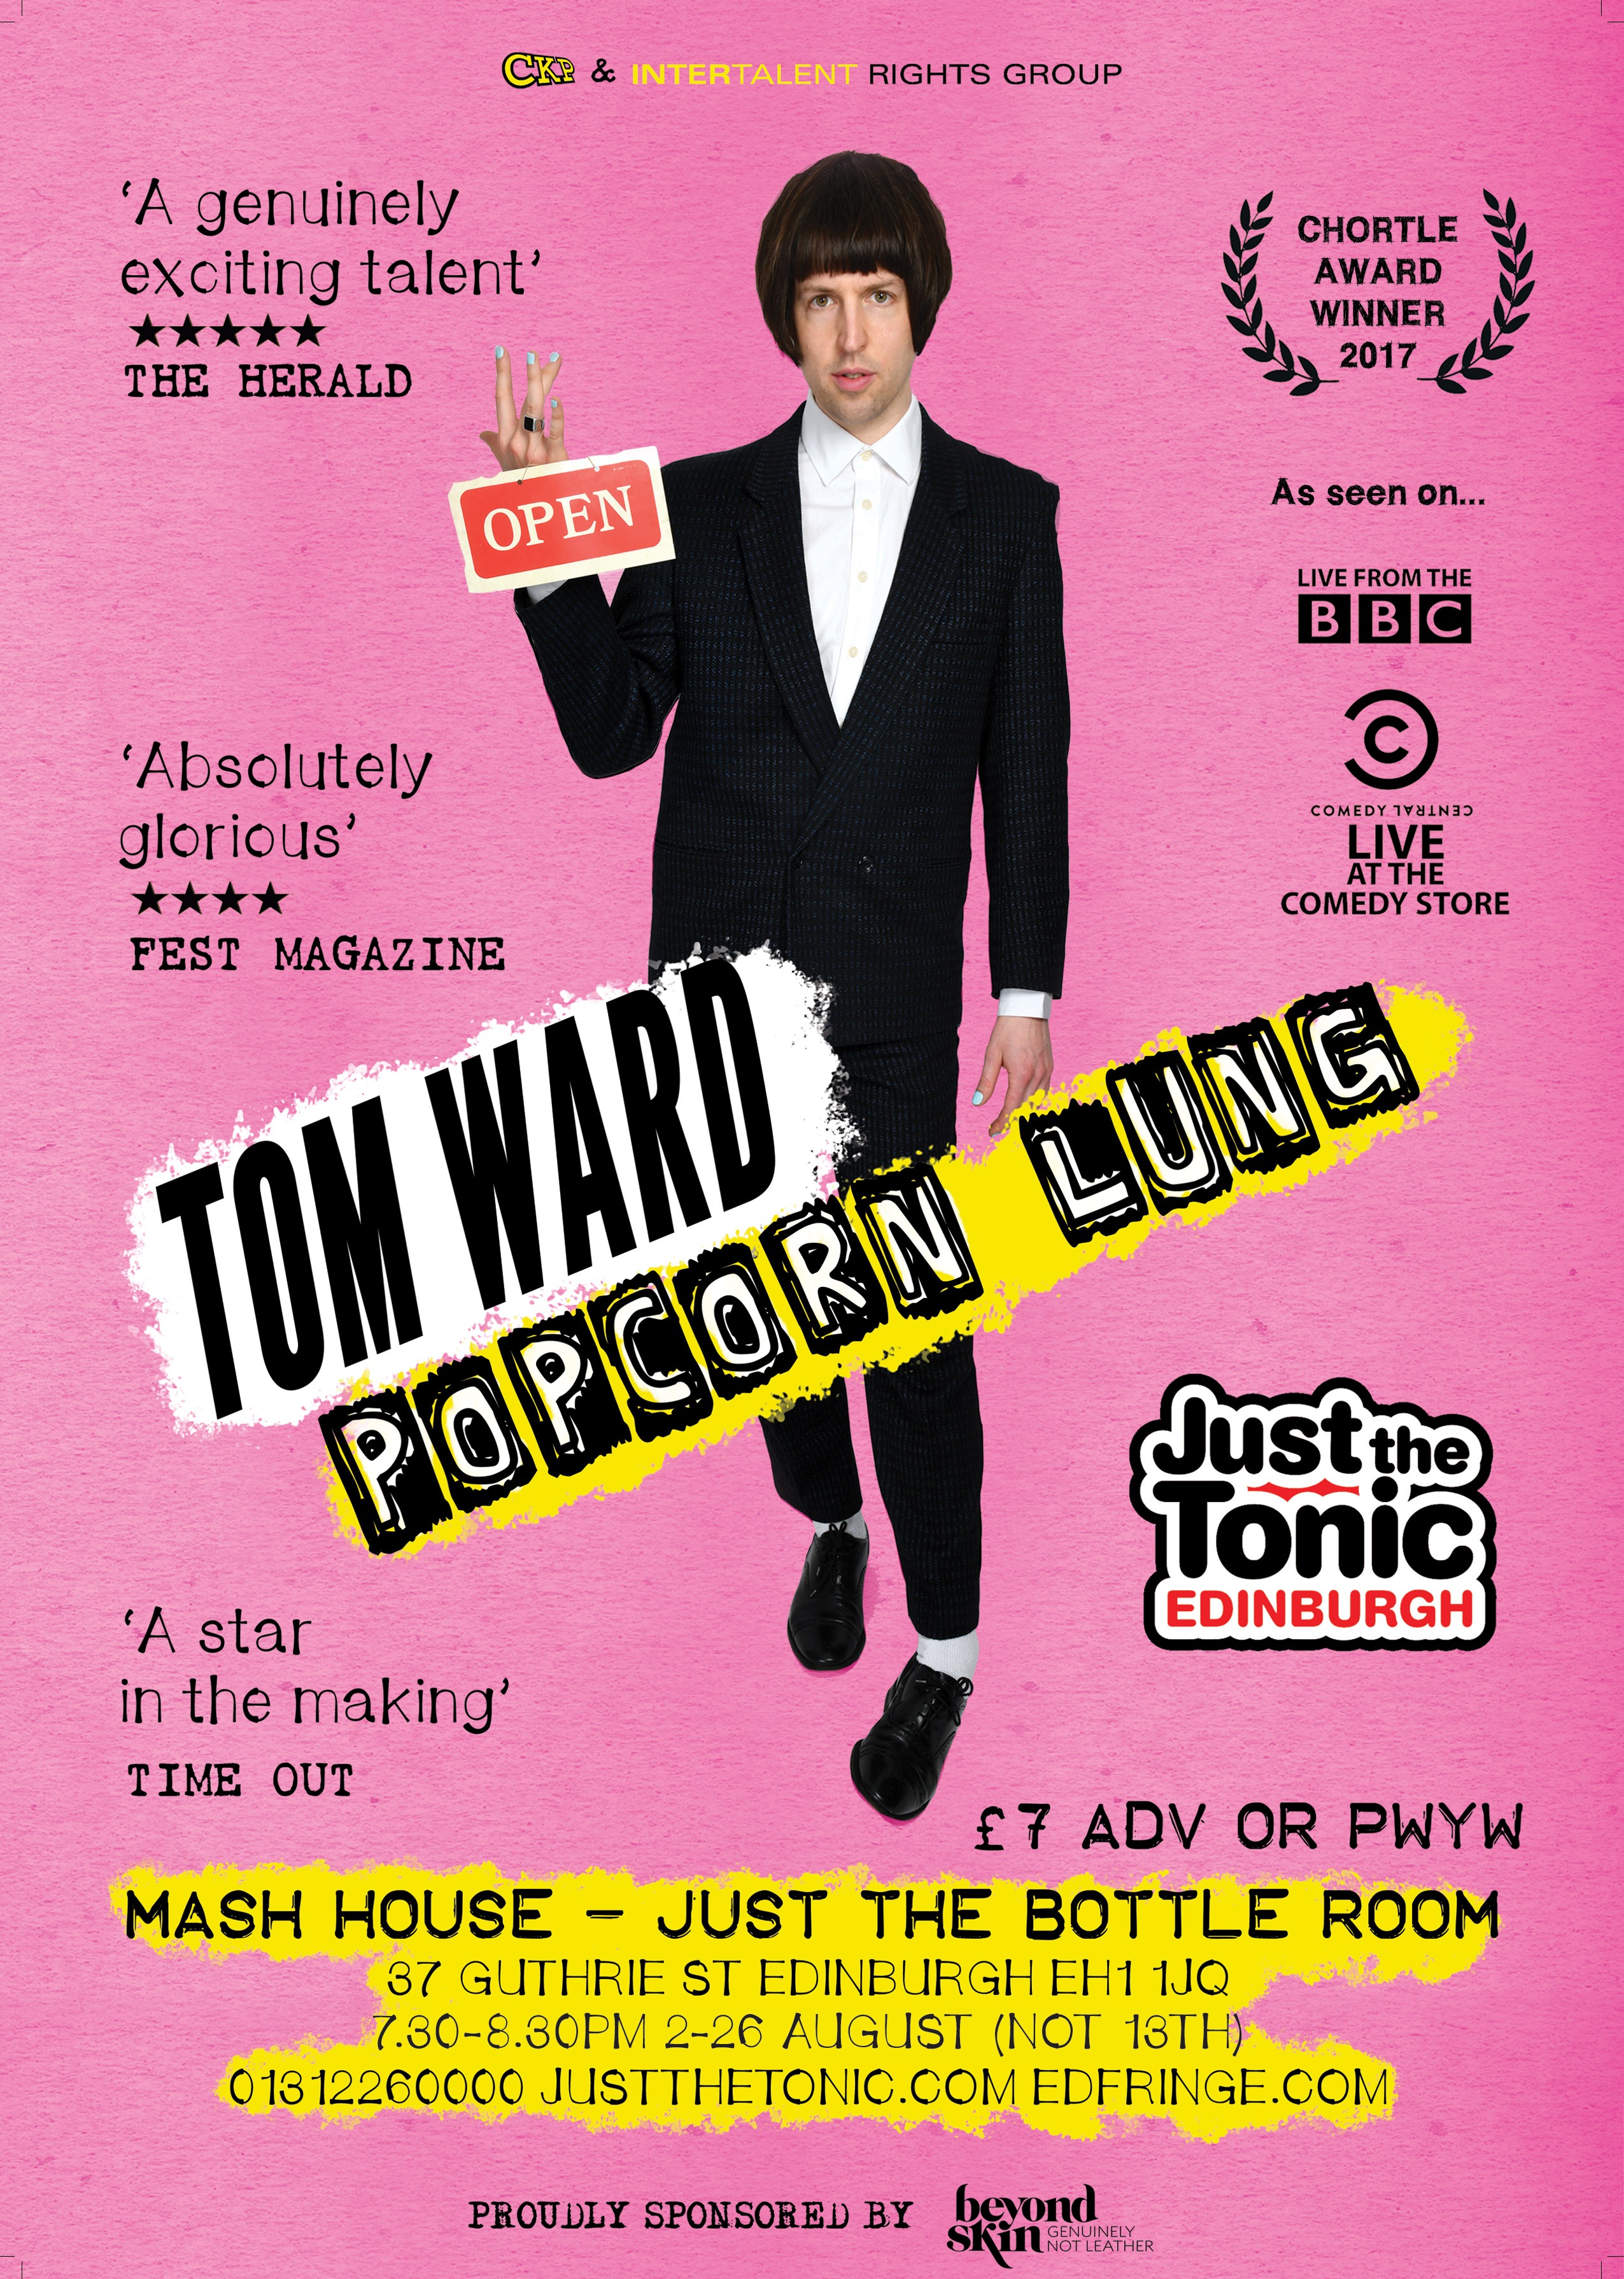 The poster for Tom Ward: Popcorn Lung